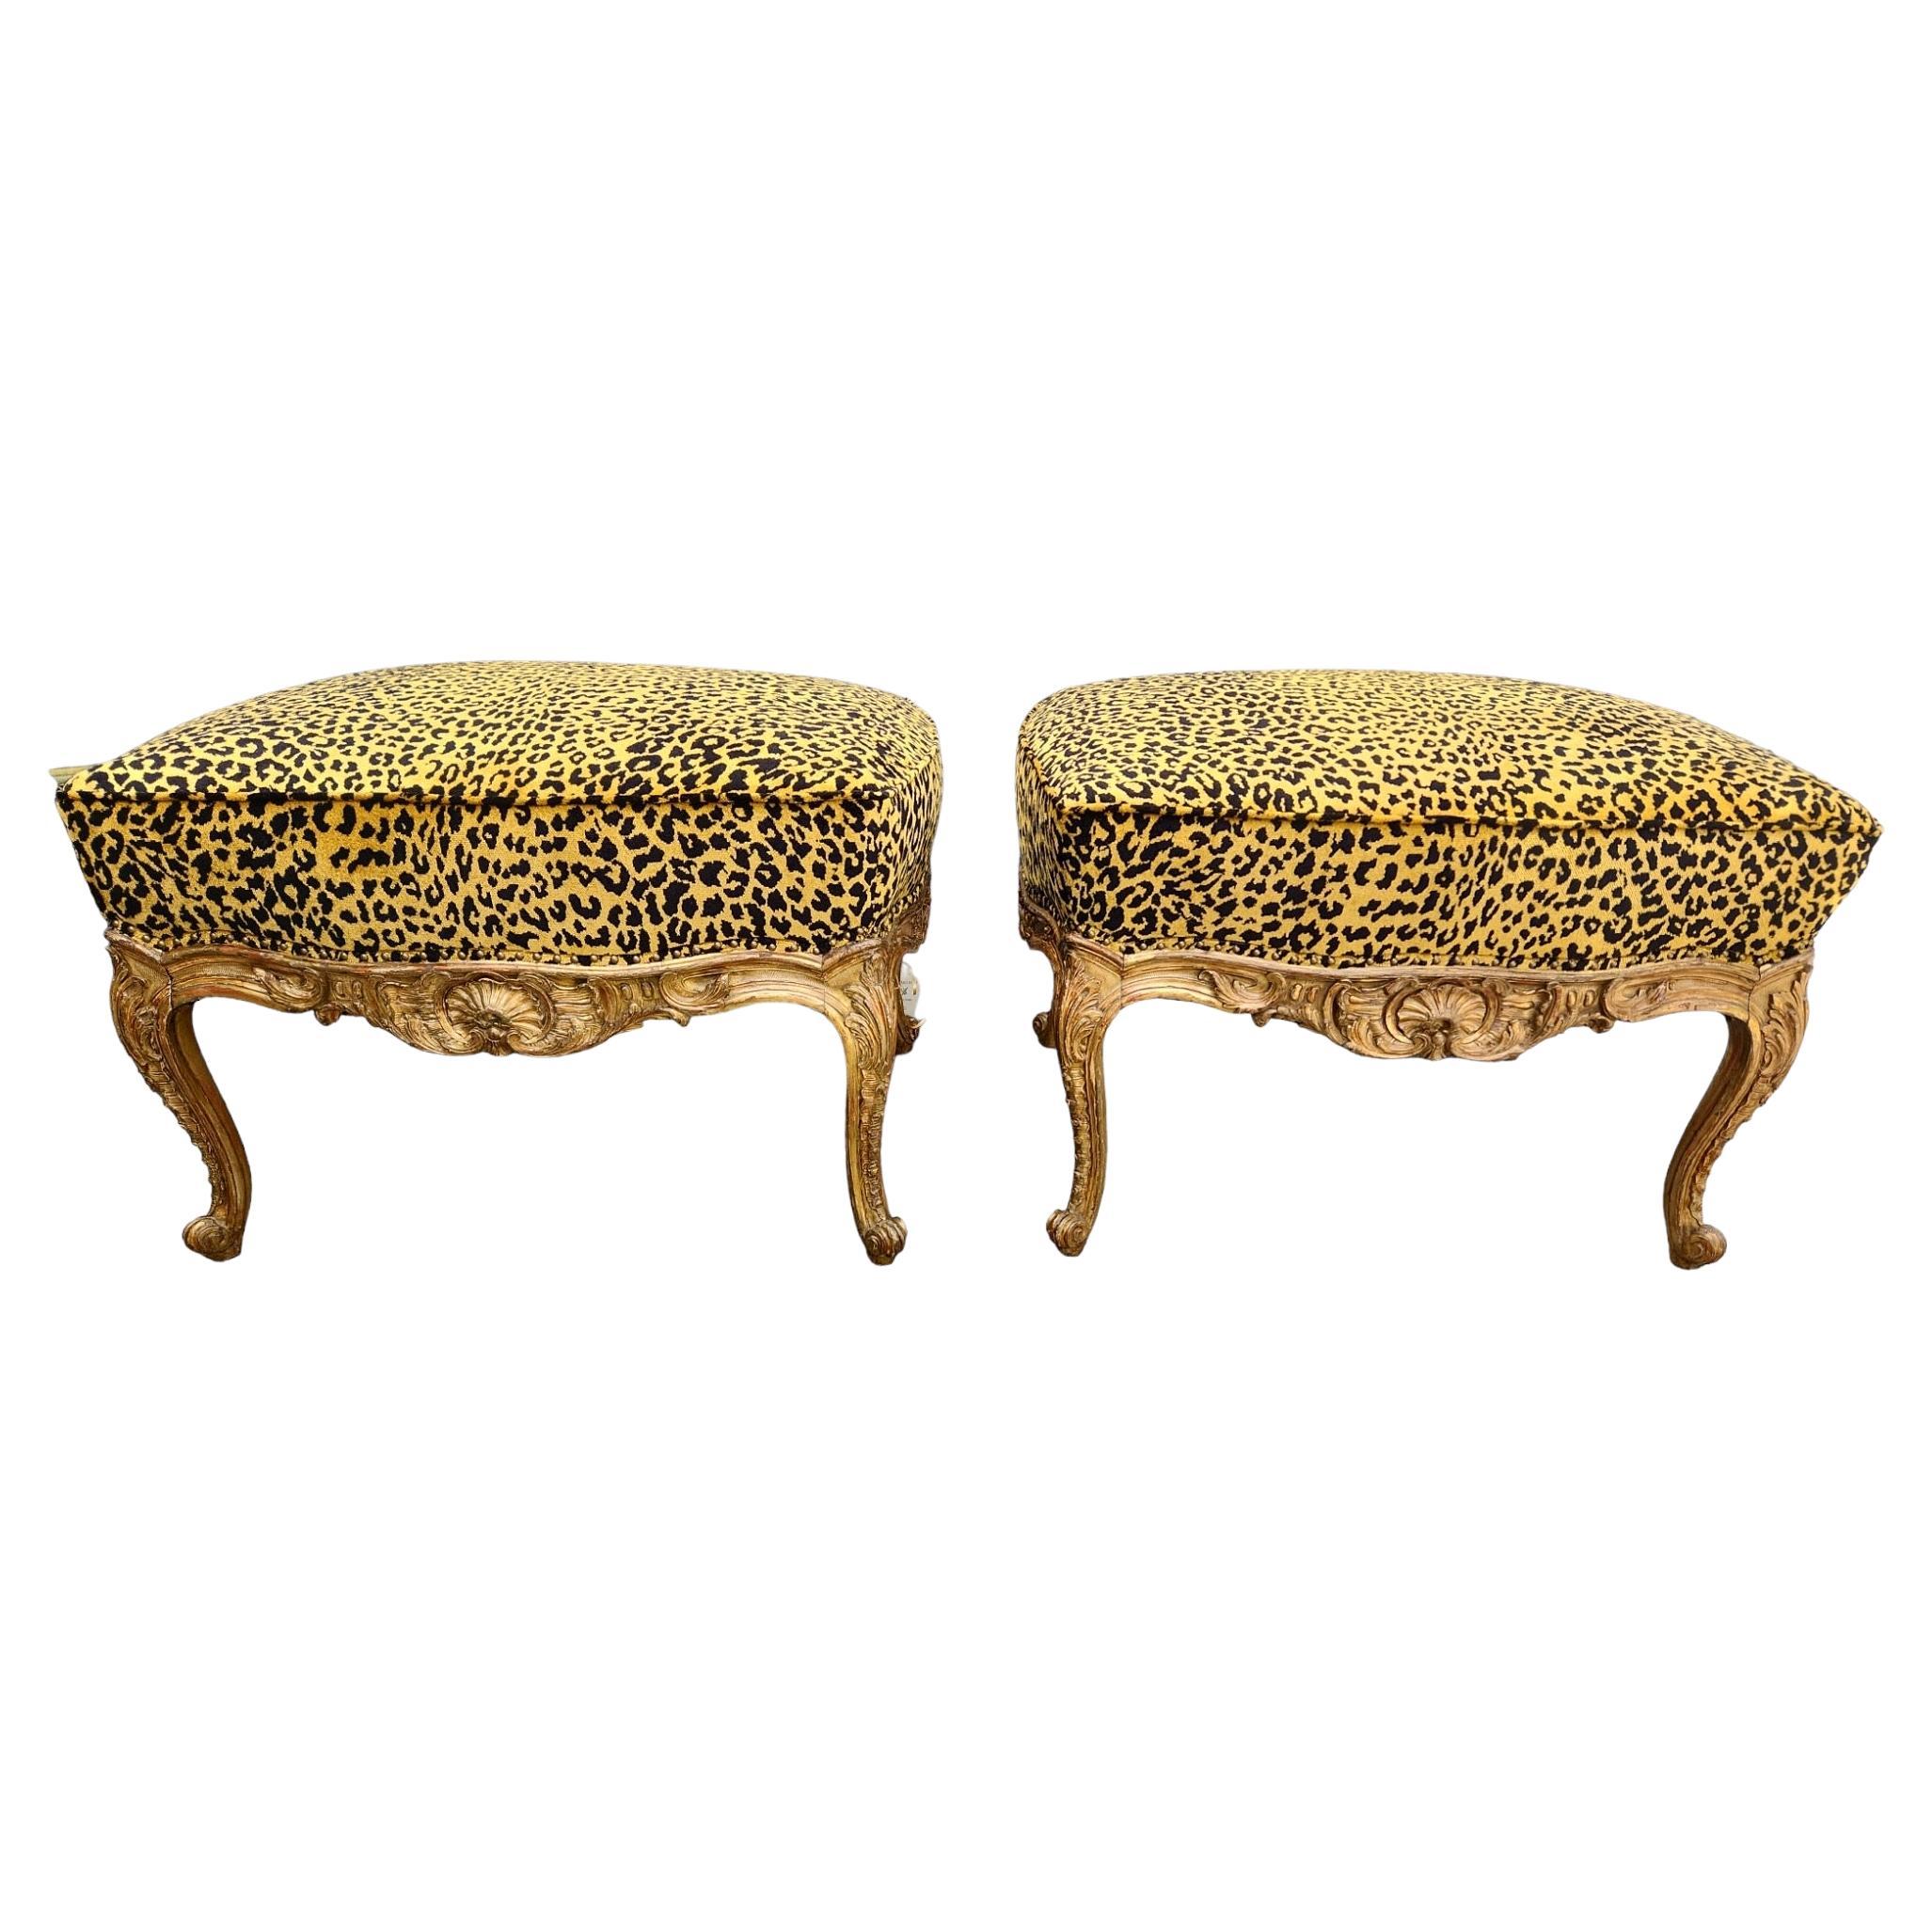 Pair of 19th Century French Giltwood Ottomans